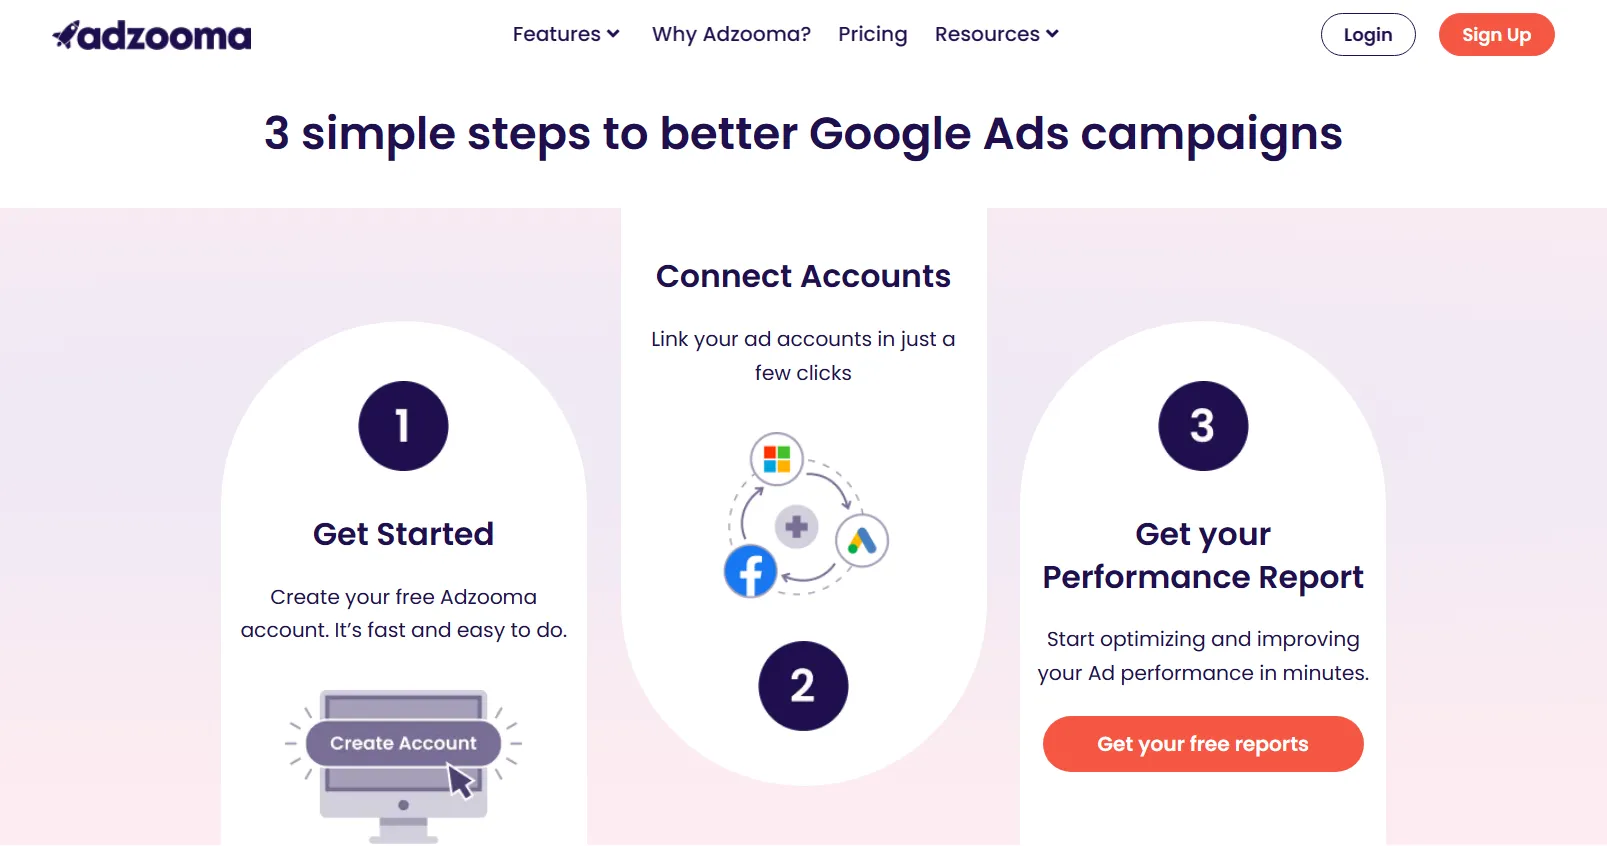 How To Get Started With Adzooma